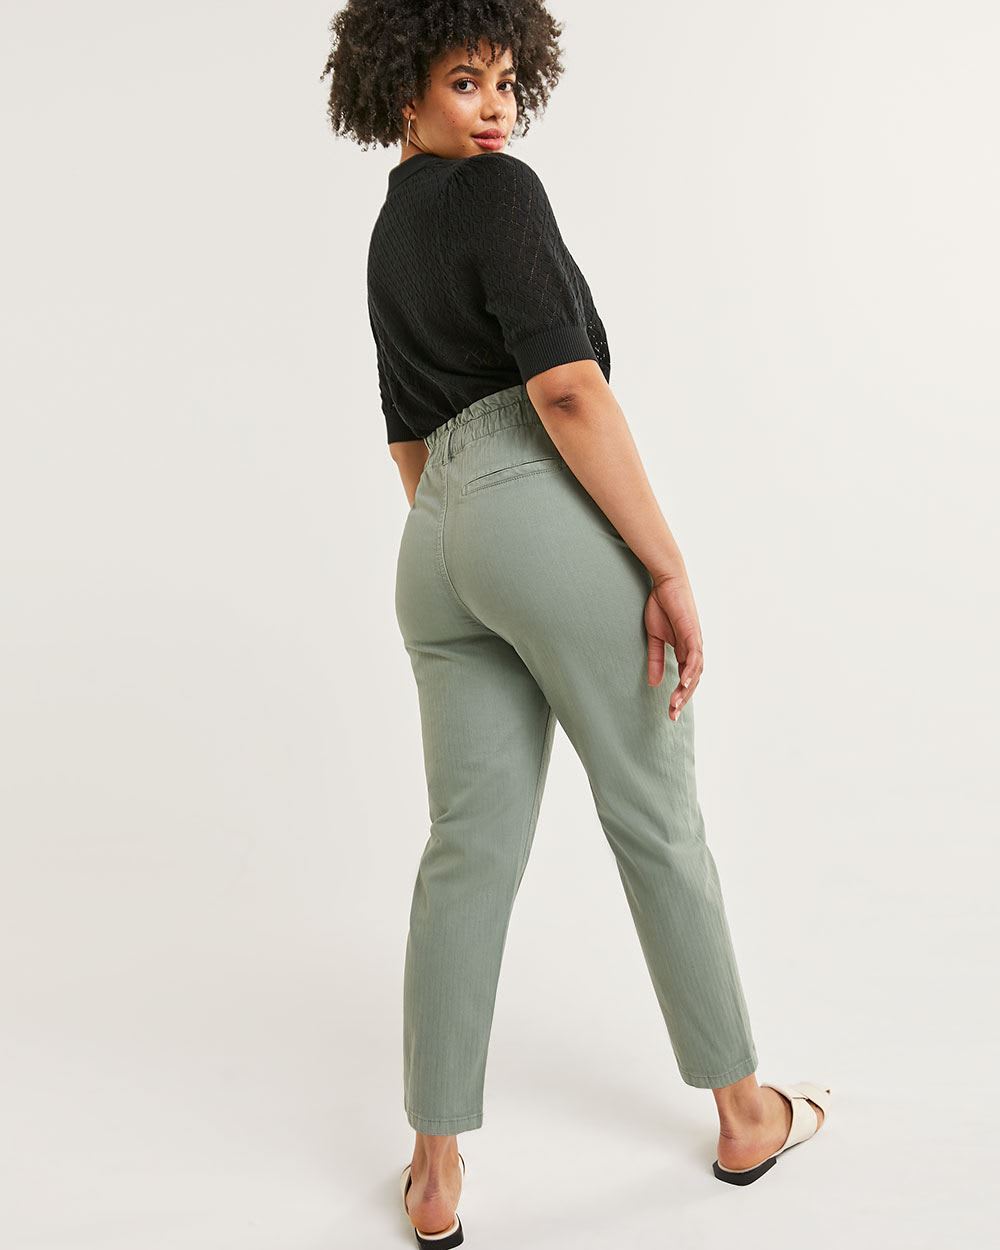 Super High Rise Ankle Tapered Chino Pants - Petite